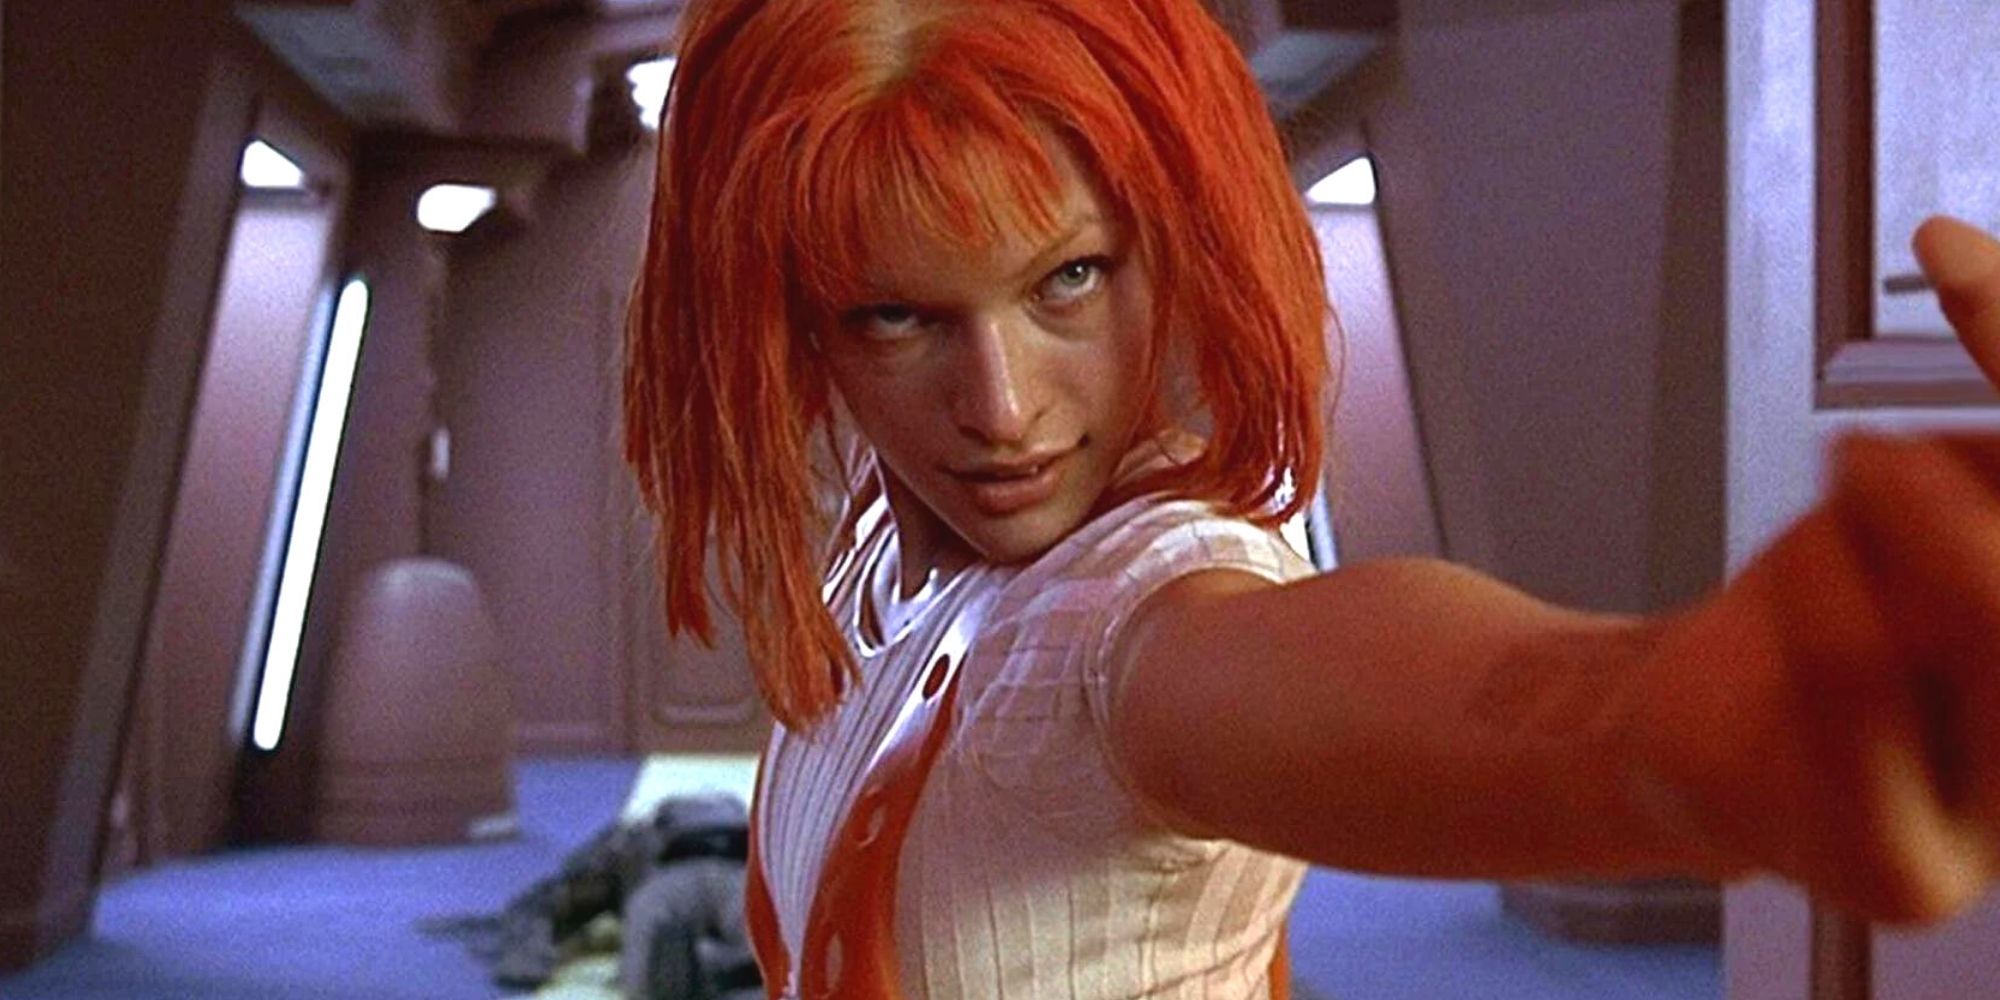 The fifth element LeeLoo reaches his arm outward